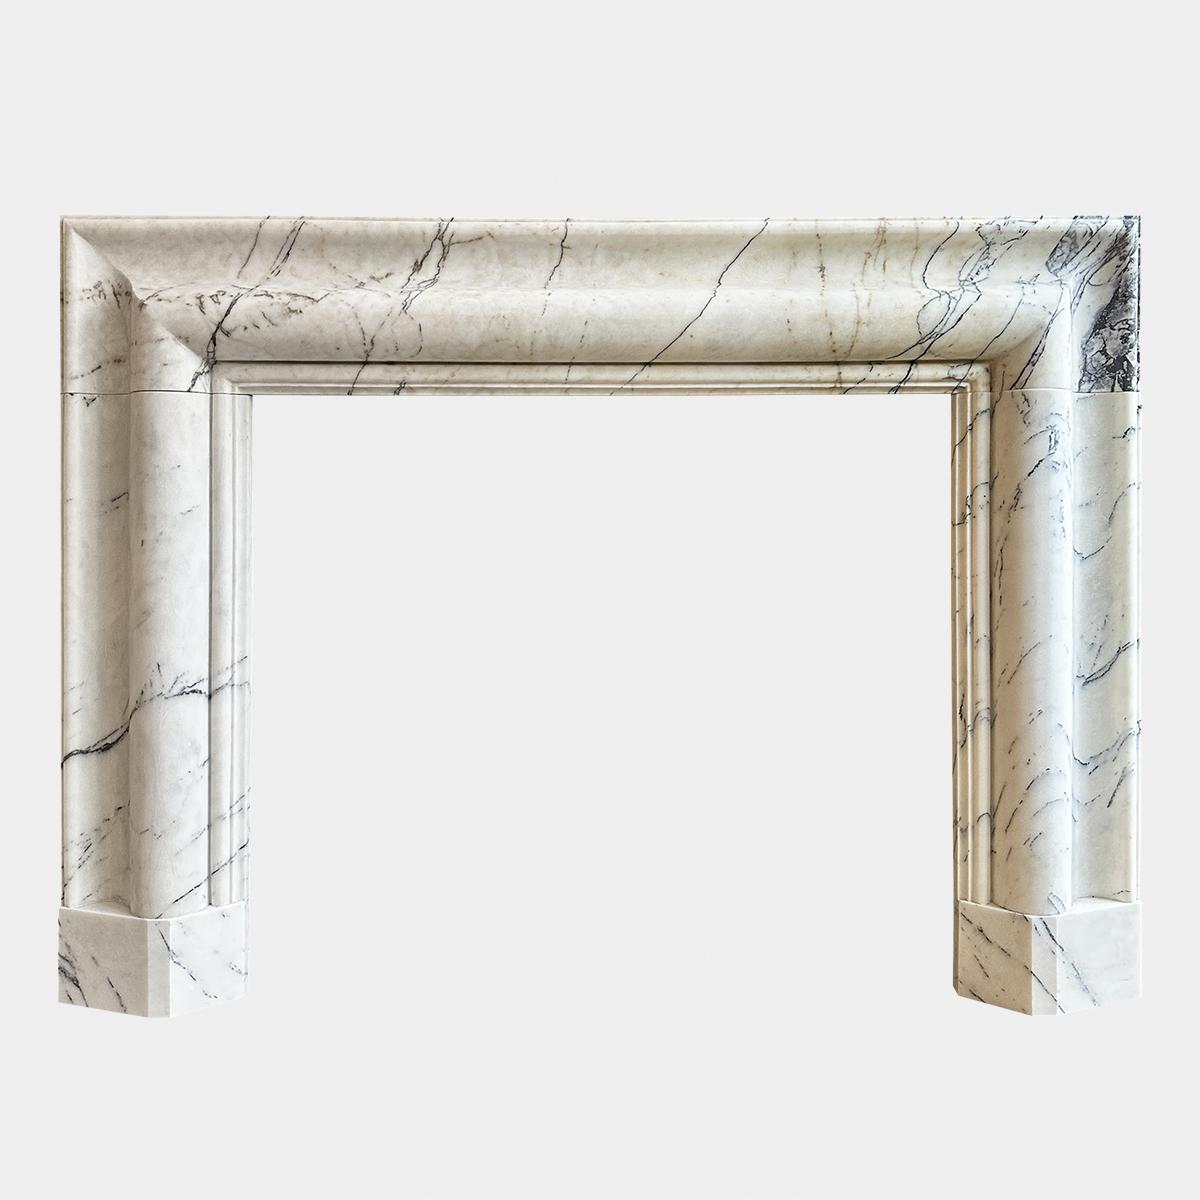 A large and substantial Bolection fireplace in Variegated Calacatta Vagli marble with a pale background, purple, grey veining and soft gold tones. Stood on shaped footblocks with a moulded inner slip. Great quality and in excellent condition for a